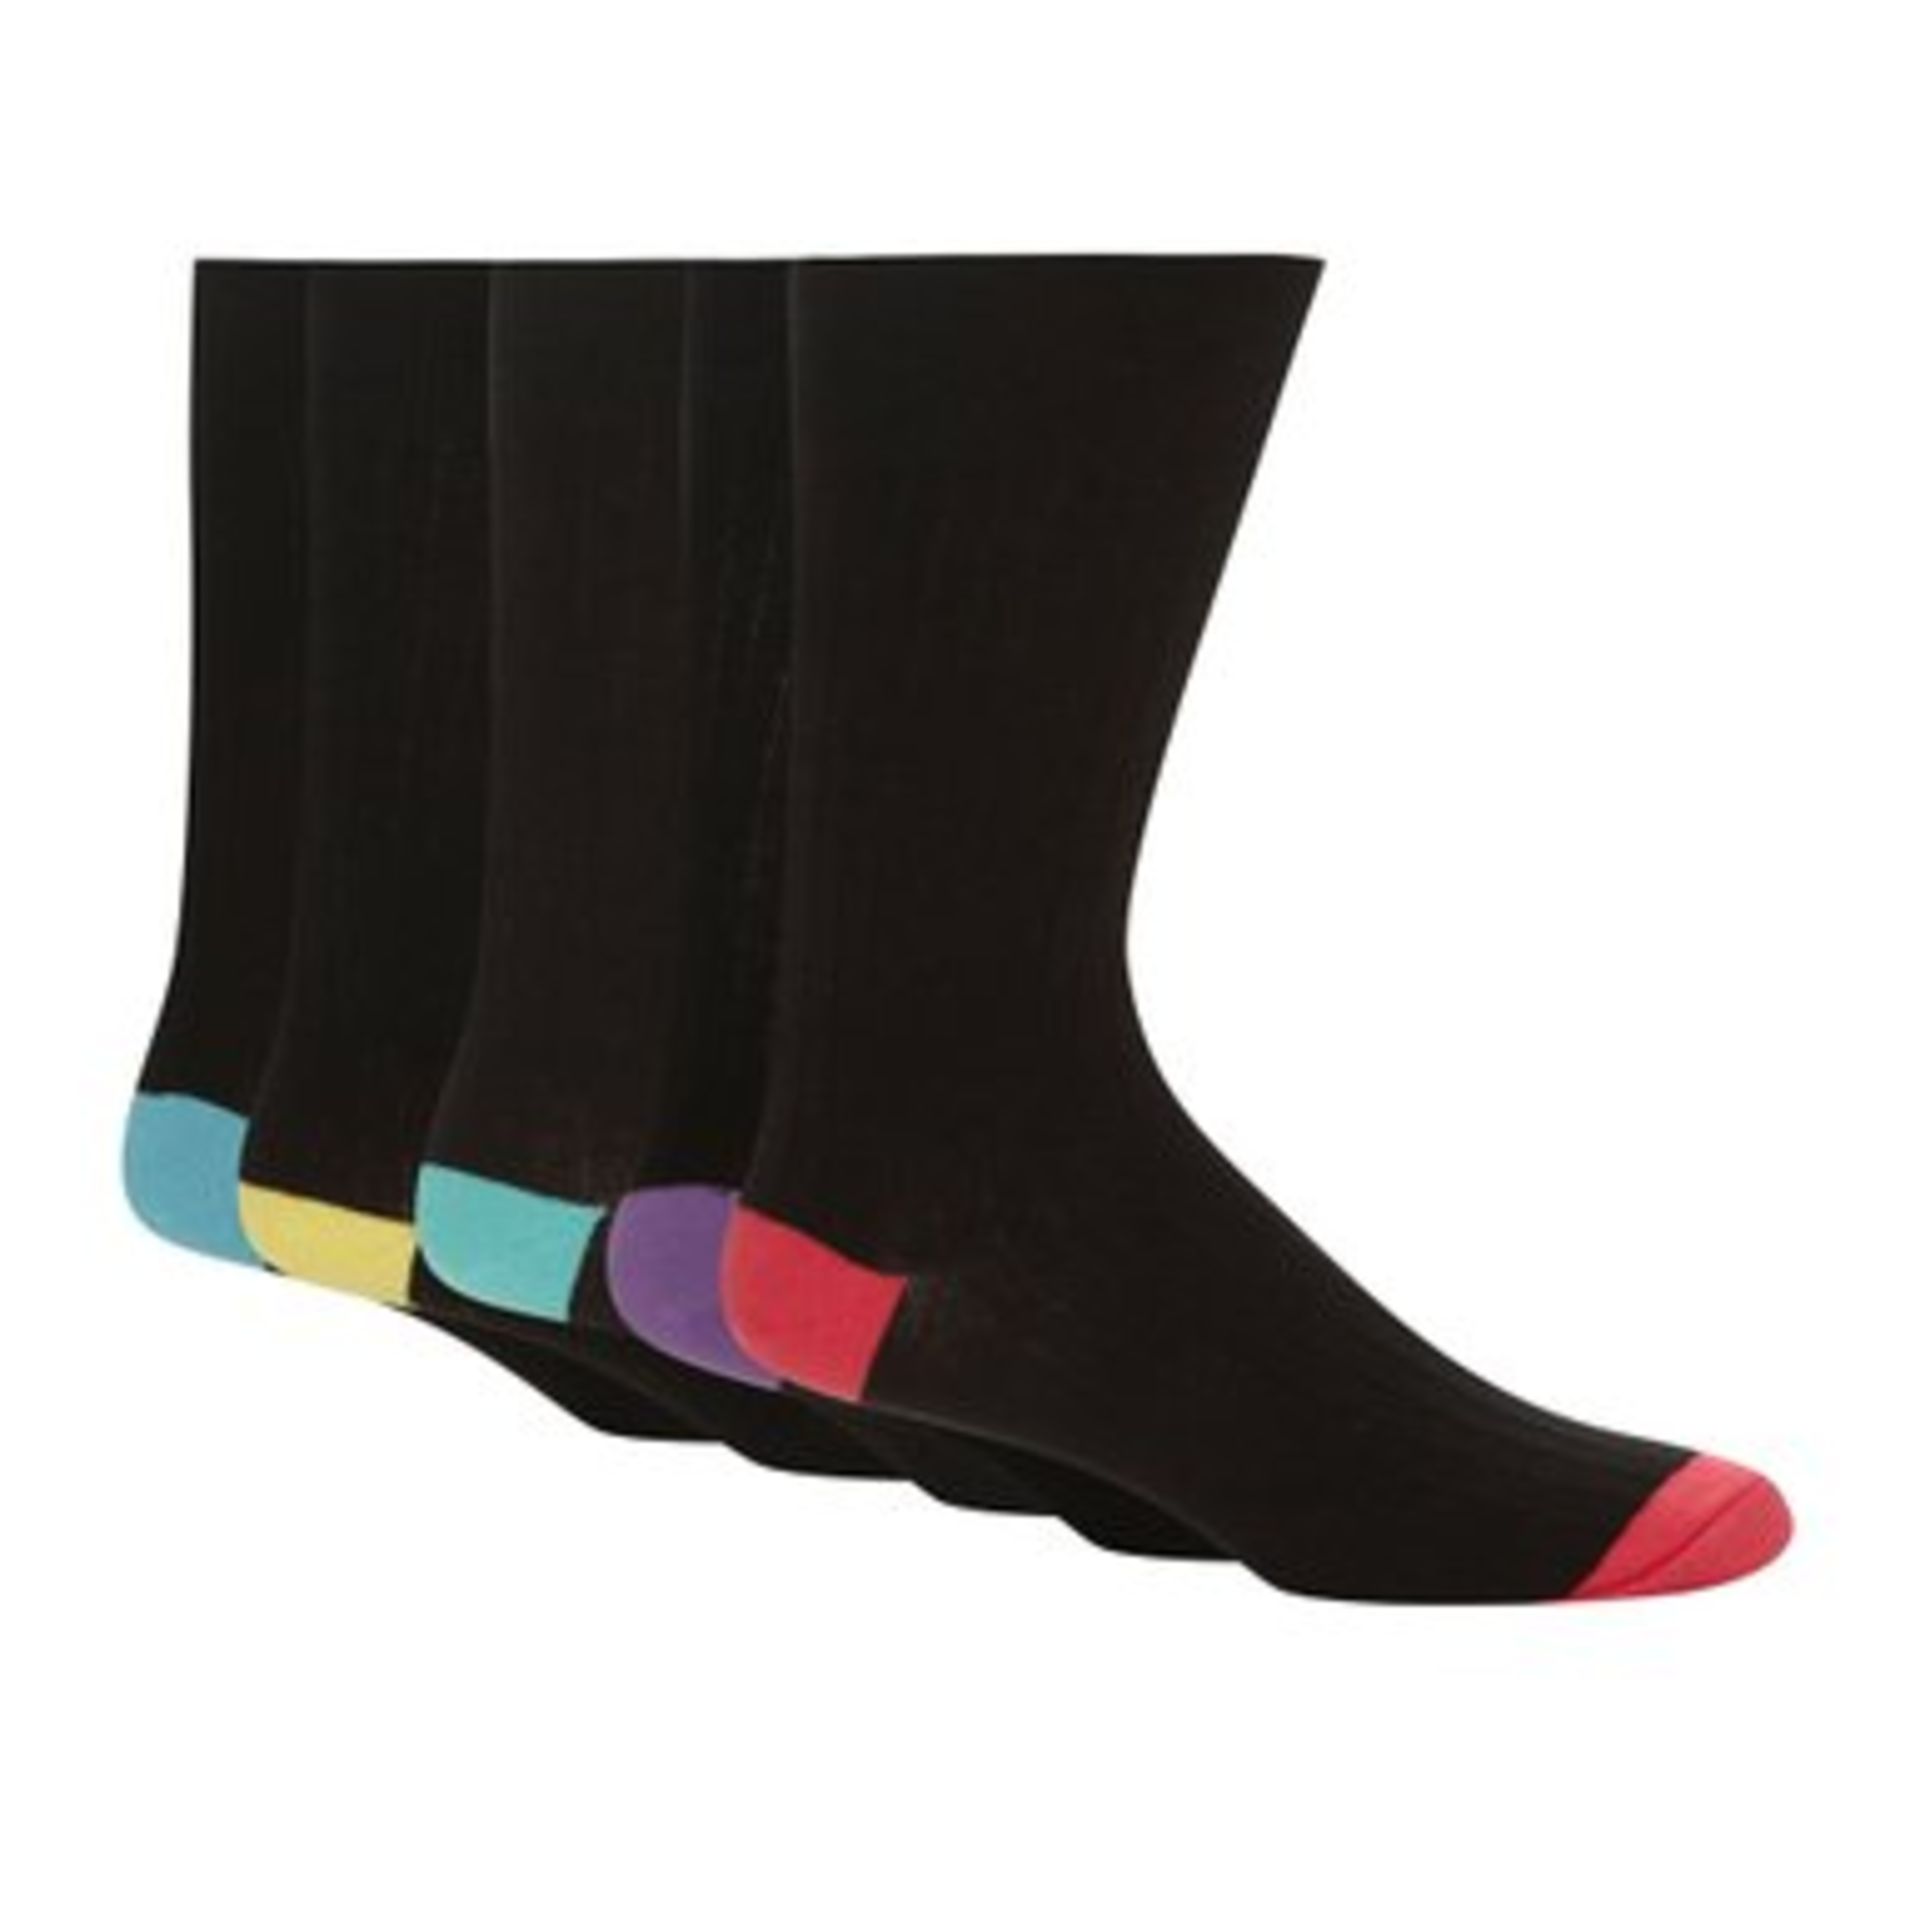 V *TRADE QTY* Brand New A Lot Of Twelve Pairs Gents Socks Size 6-11 (Image is similar) X 4 YOUR